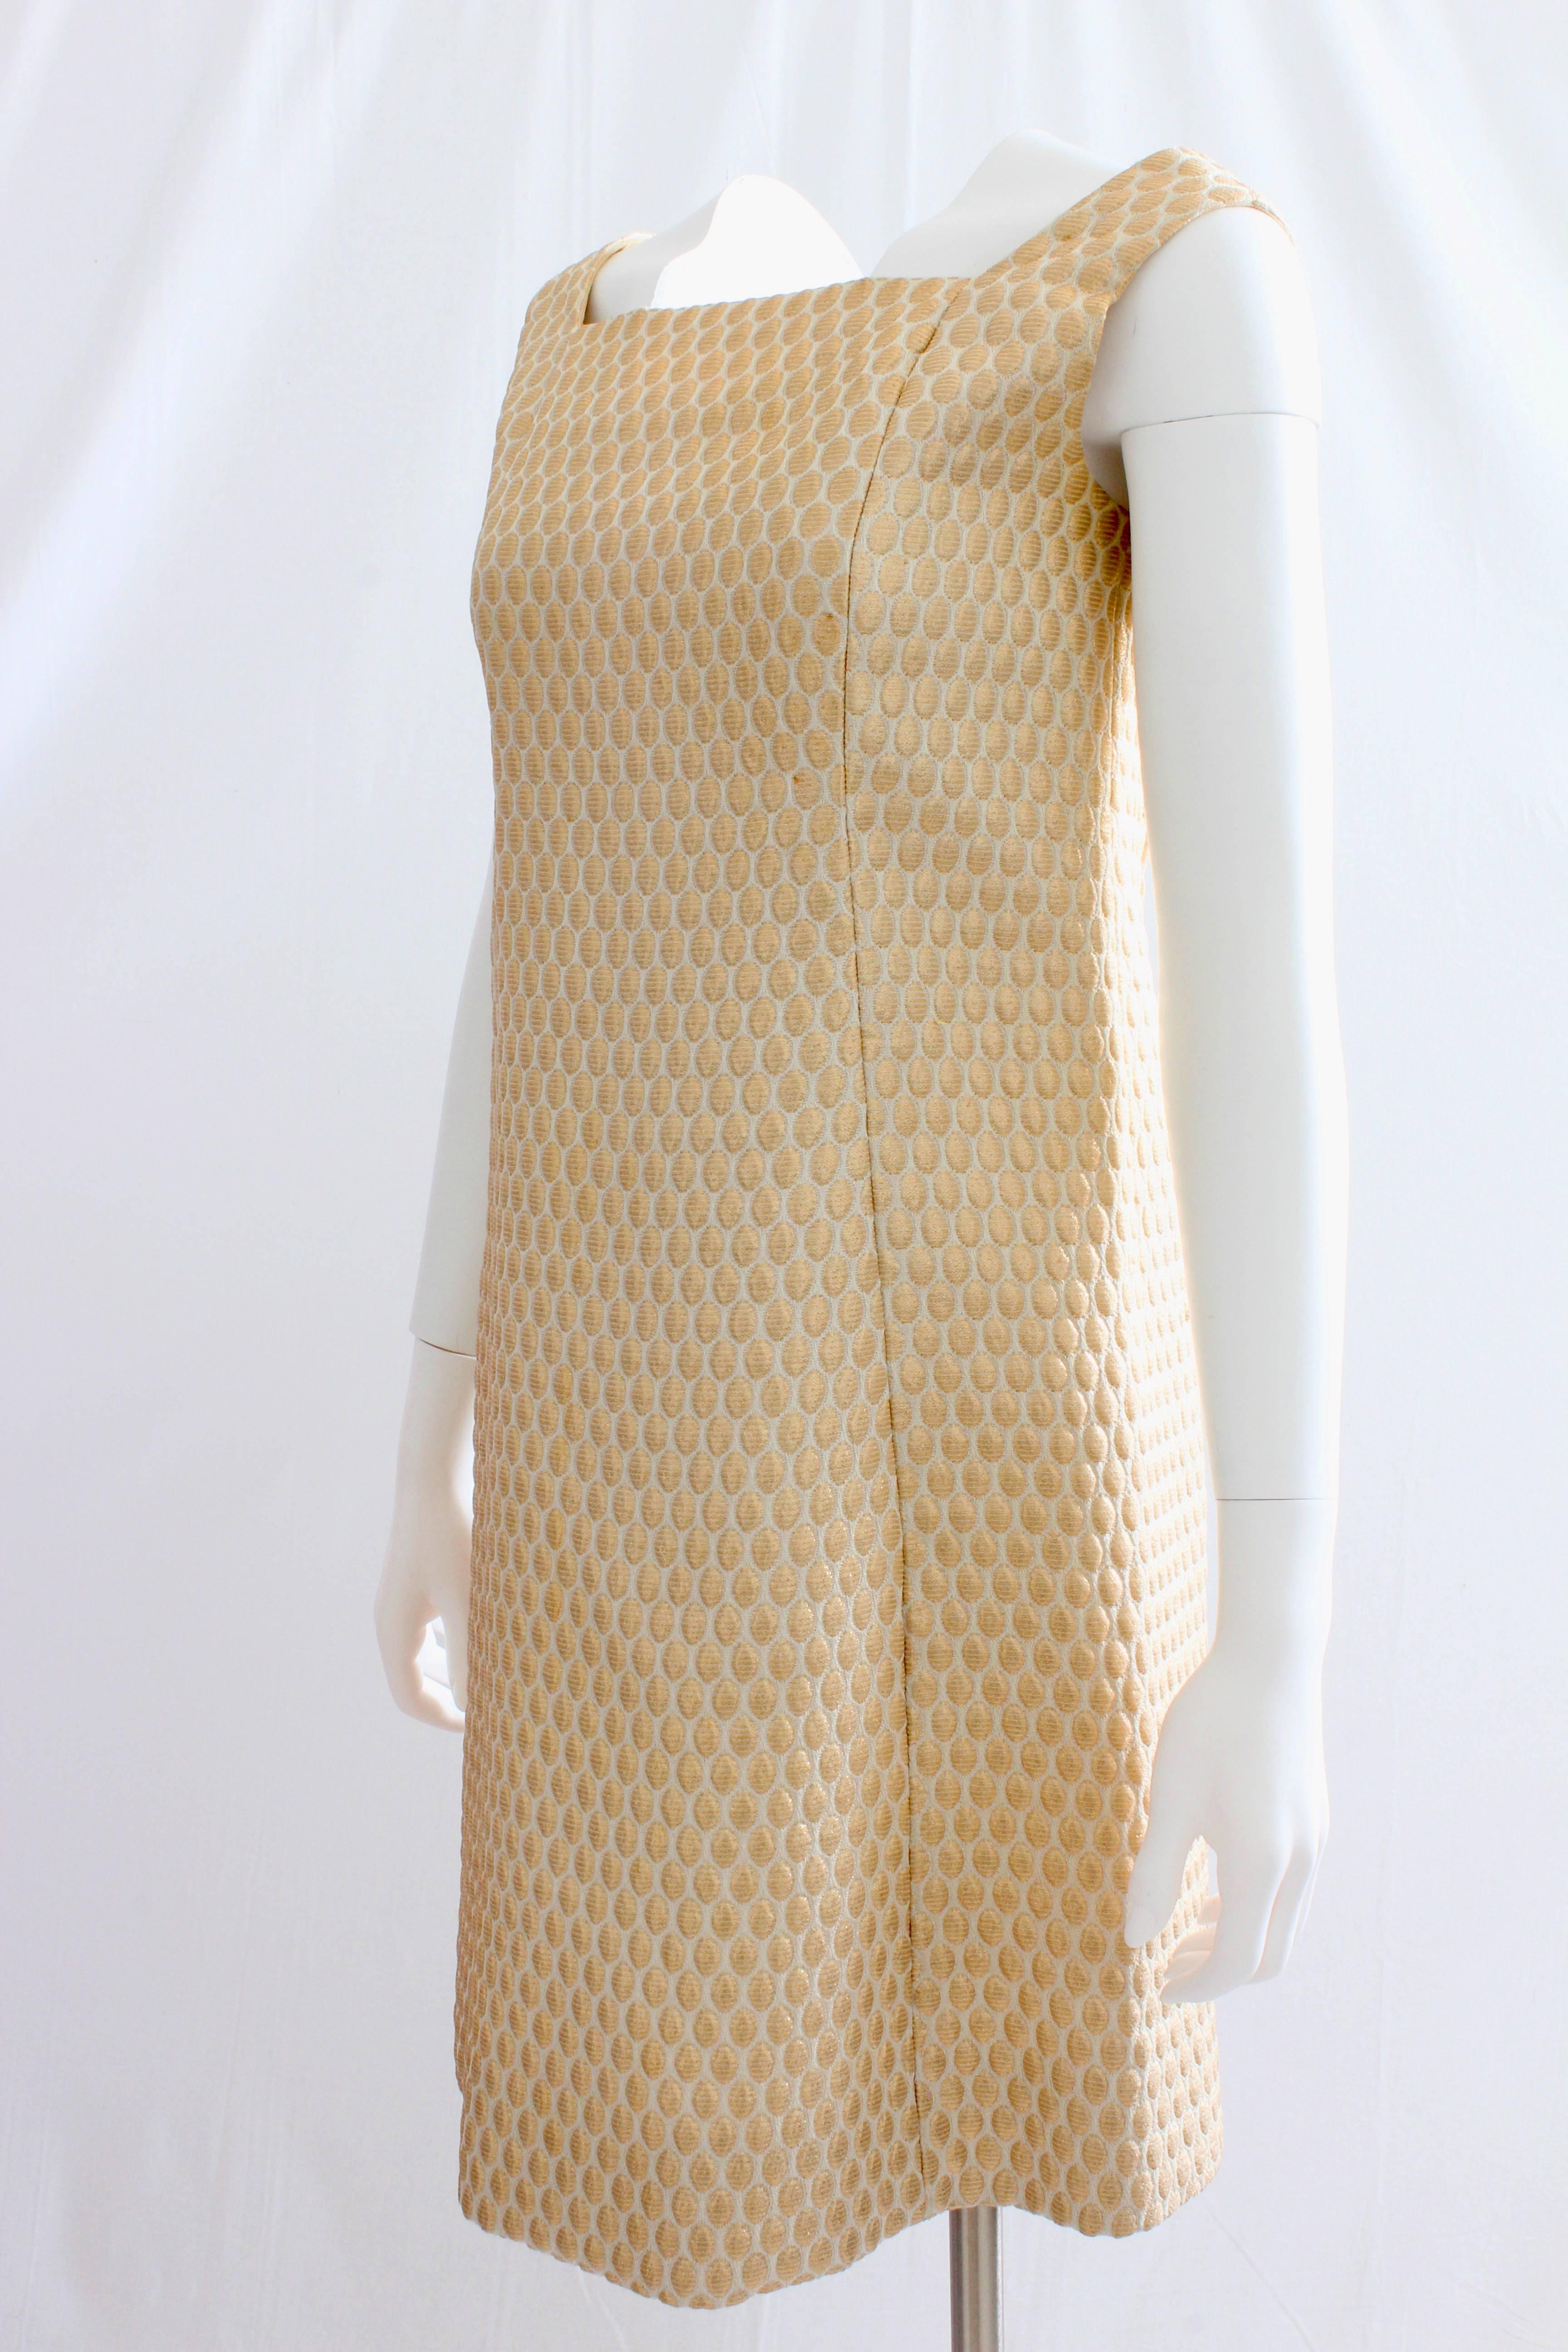 This fabulous little dress was made by Hannah Troy, most likely in the mid 1960s.  Made from what we believe is a poly blend fabric (no content label), it features gold lurex oval-shaped polka dots throughout.  Fully-lined with a A-line silhouette,